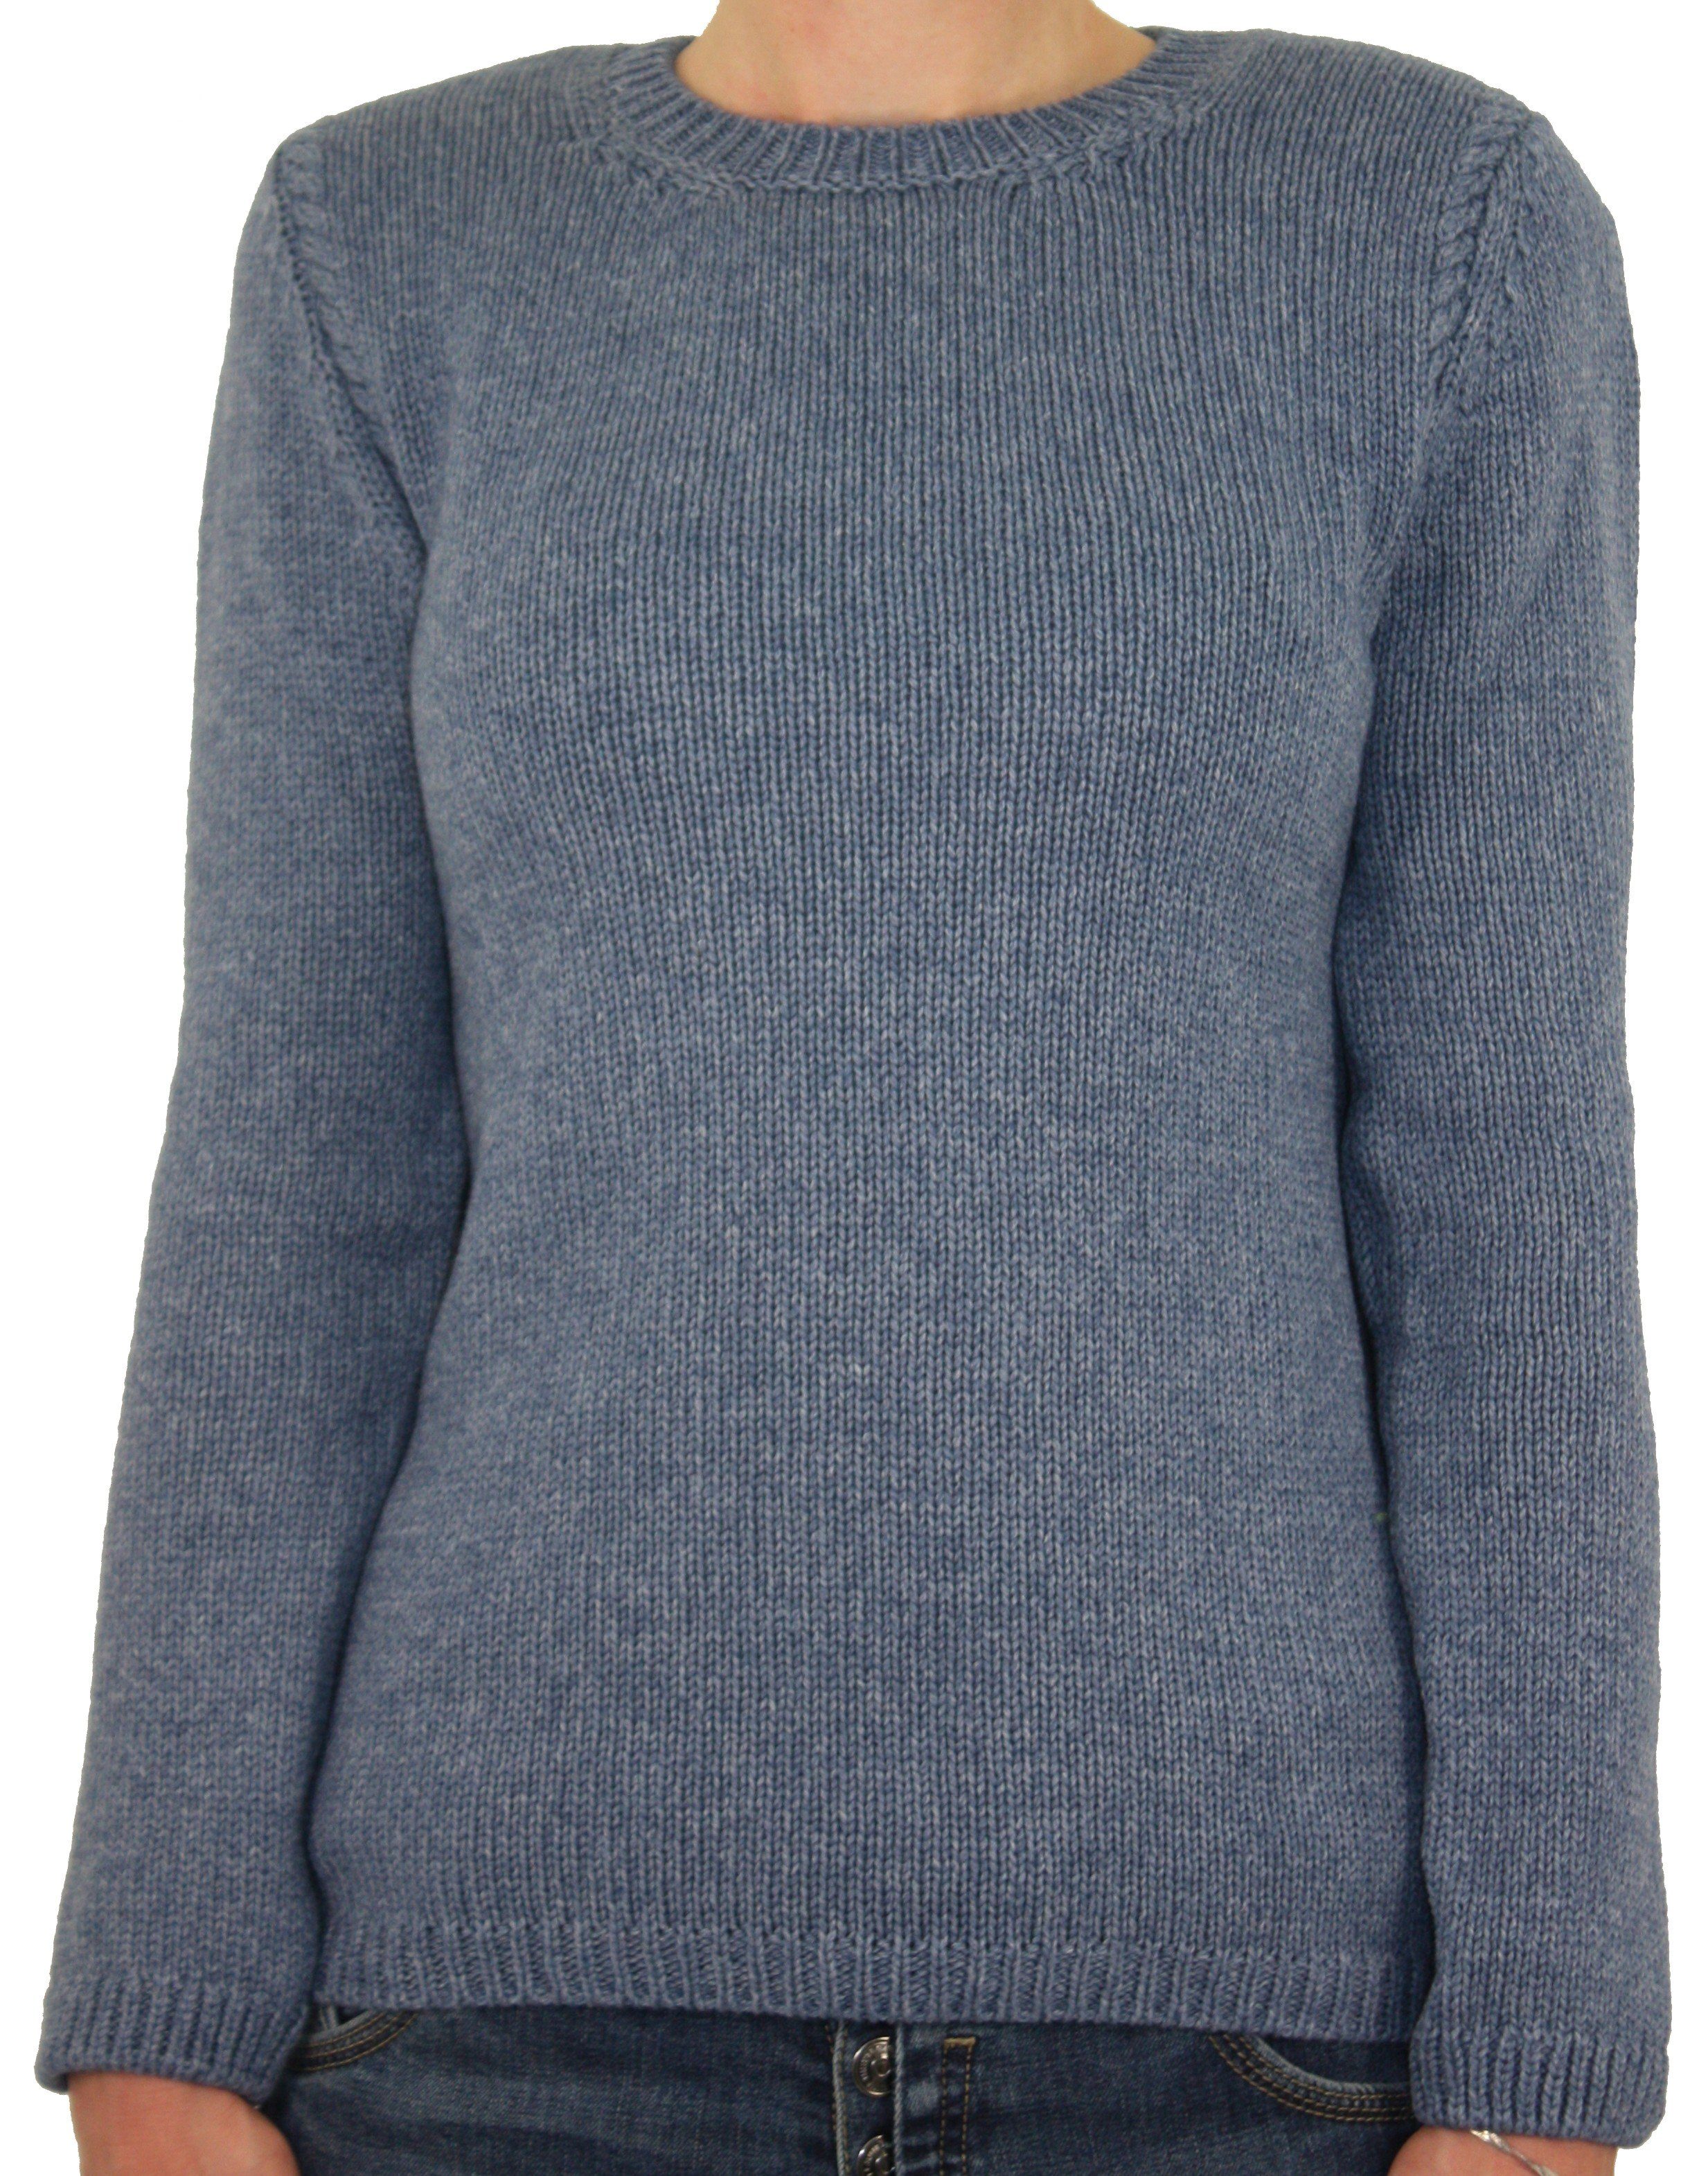 Irelandseye Wollpullover Lahinch Jersey Cable Round Neck Sweater Women blue wave